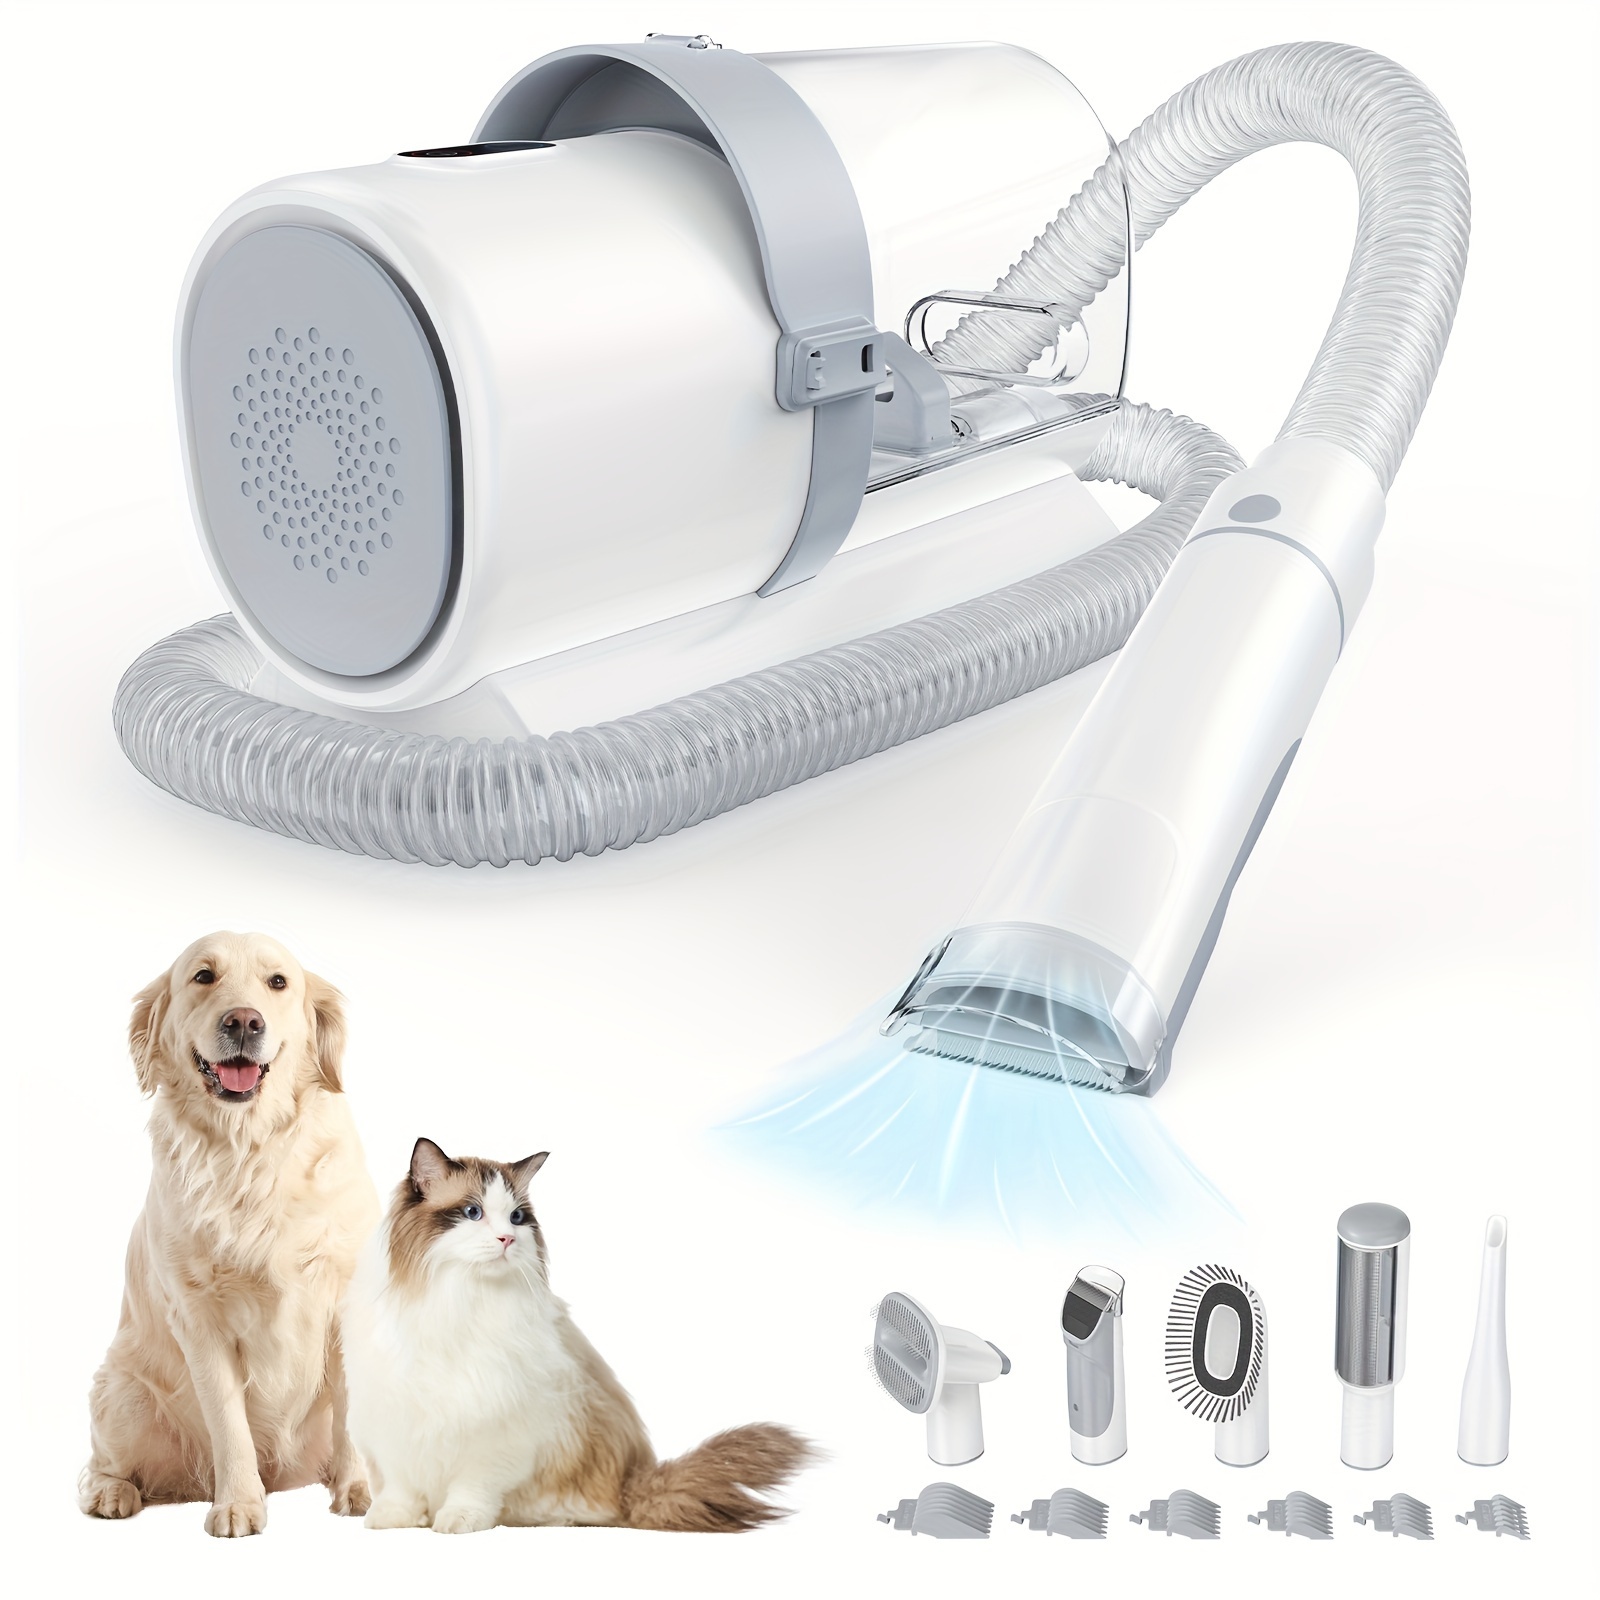 

Pet Grooming Vacuum Kit, Professional Dog Grooming Clippers With 2.5l Cup, 3 Suction Modes, Cordless Clippers, 5 Groomer Tools, Low Noise Pet Hair Trimmer For Dogs, Cats And Other Animals